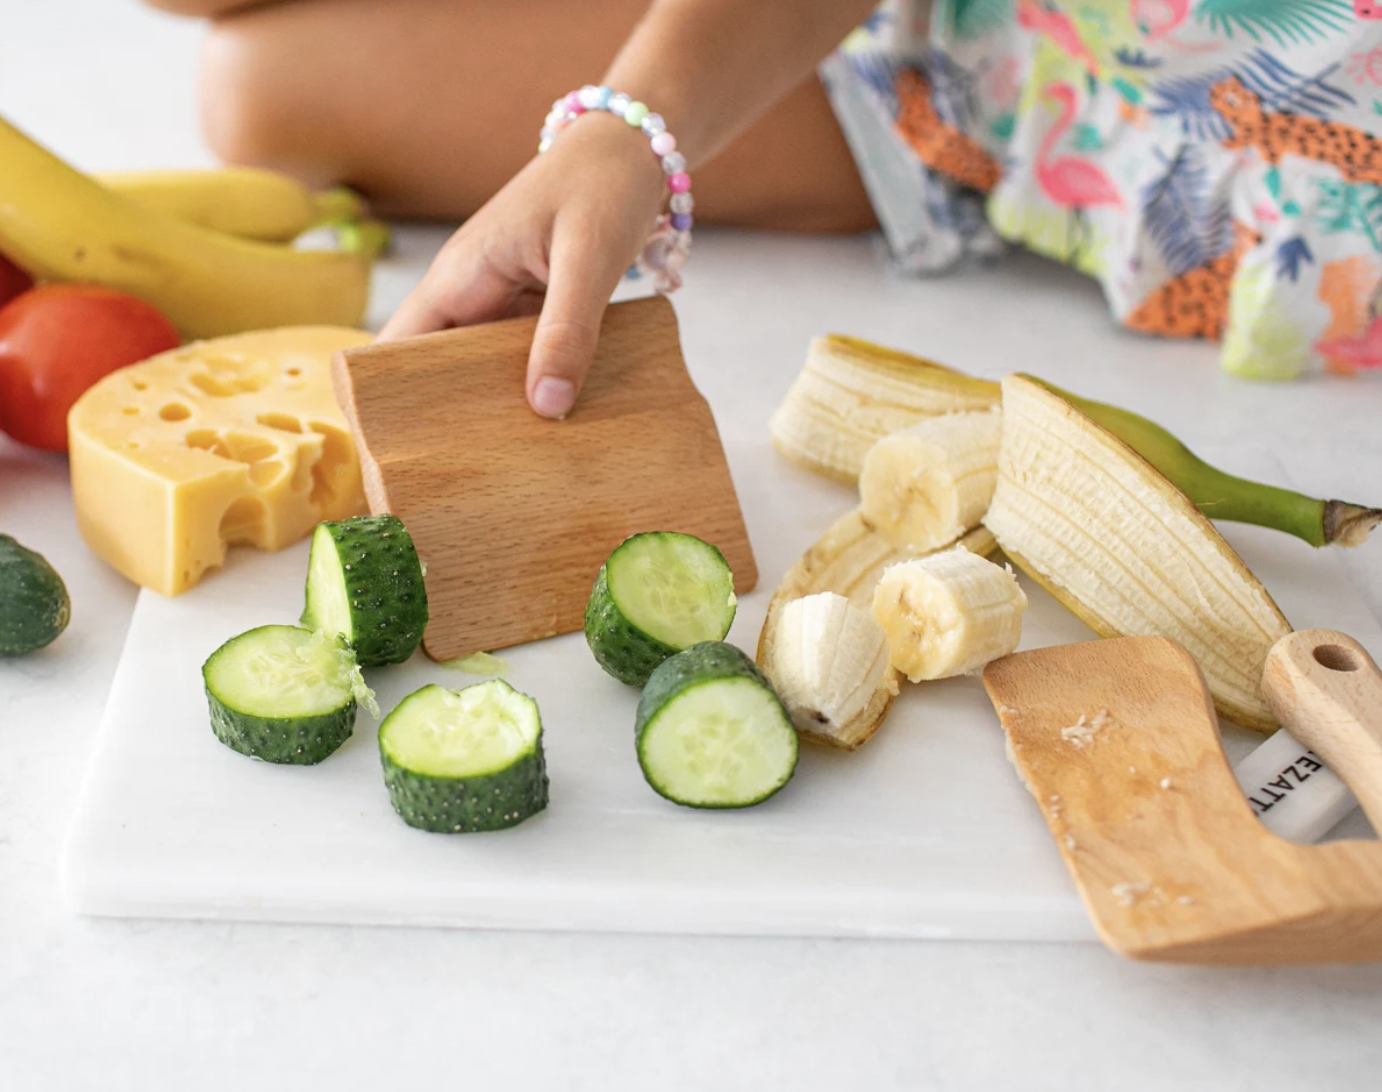 A child holding the wooden knife with chop fruits and veggies around